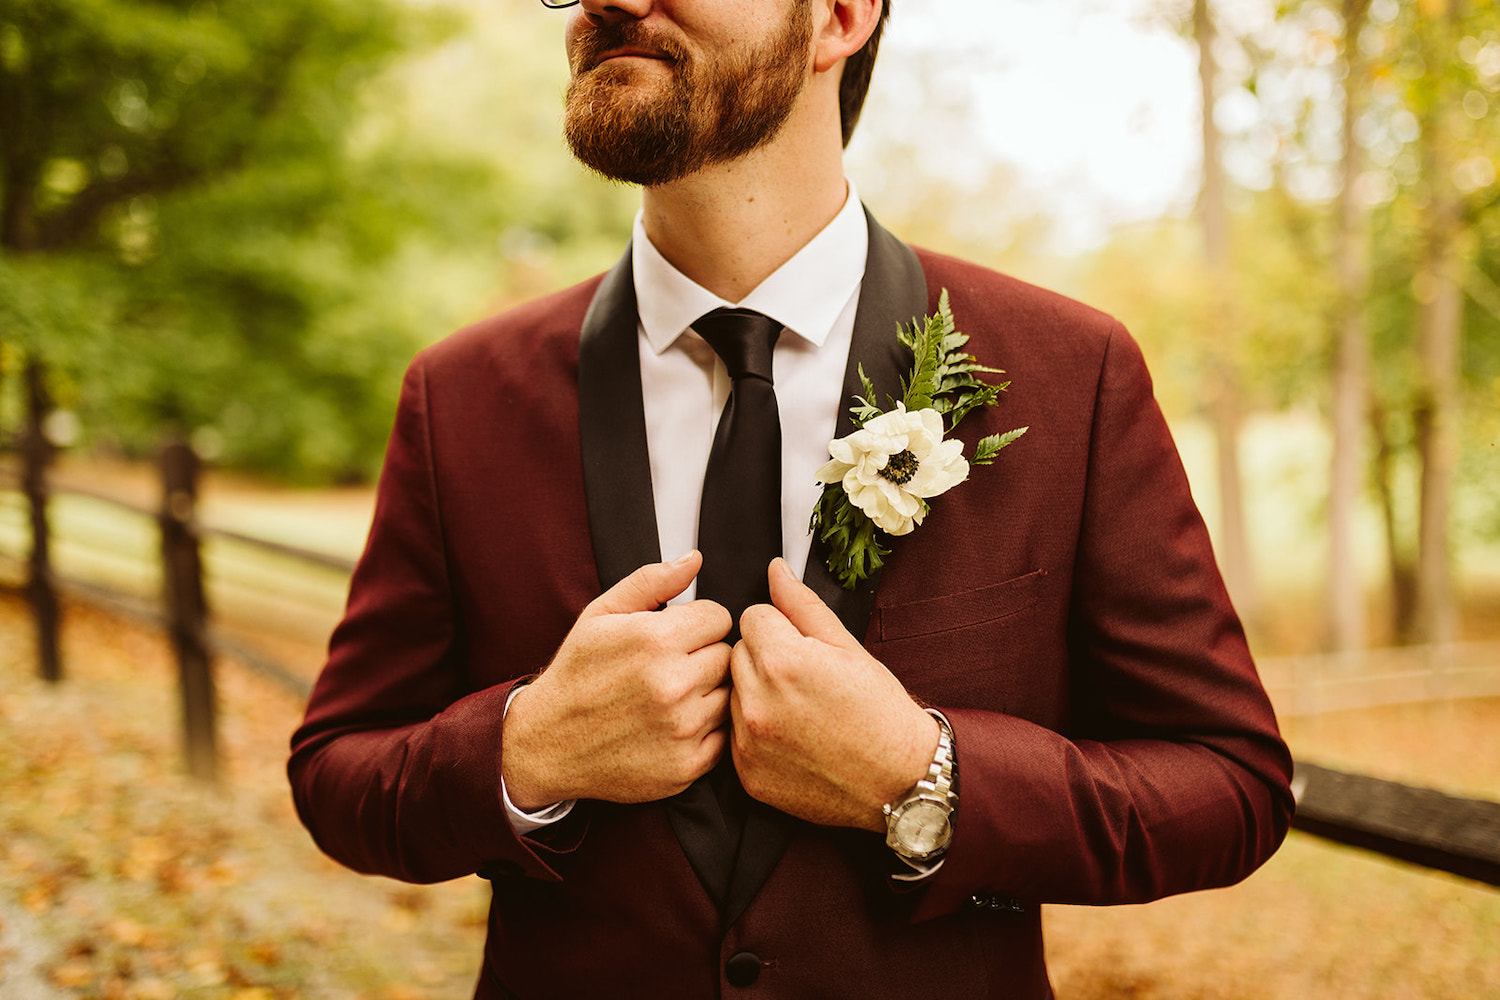 man grasps the black lapels of his maroon suit. a simple boutonniere of greens and white flower is pinned to his lapel.